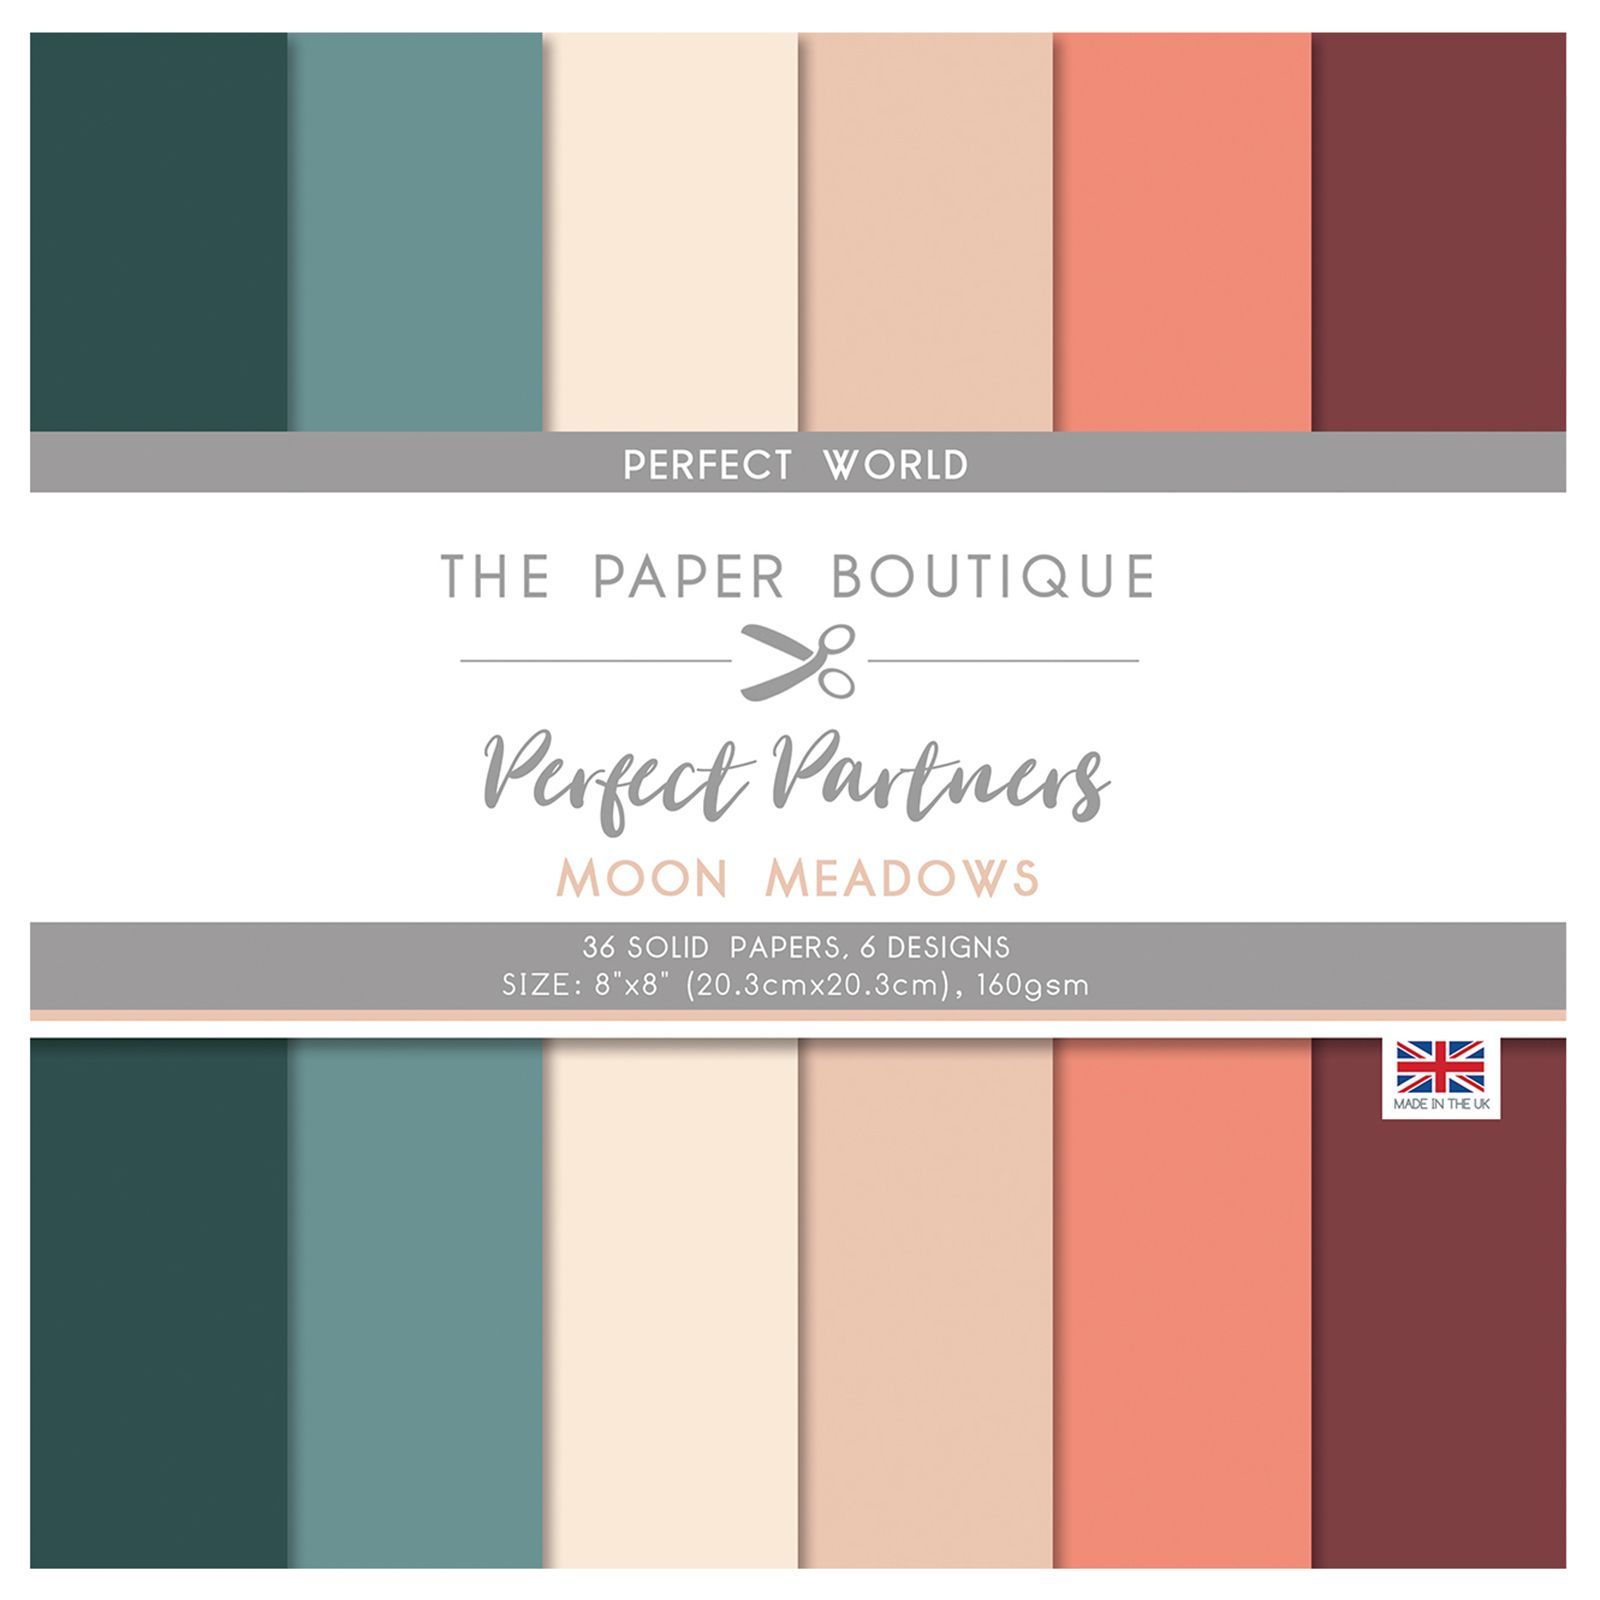 The Paper Boutique • Perfect partners moon meadows Solids